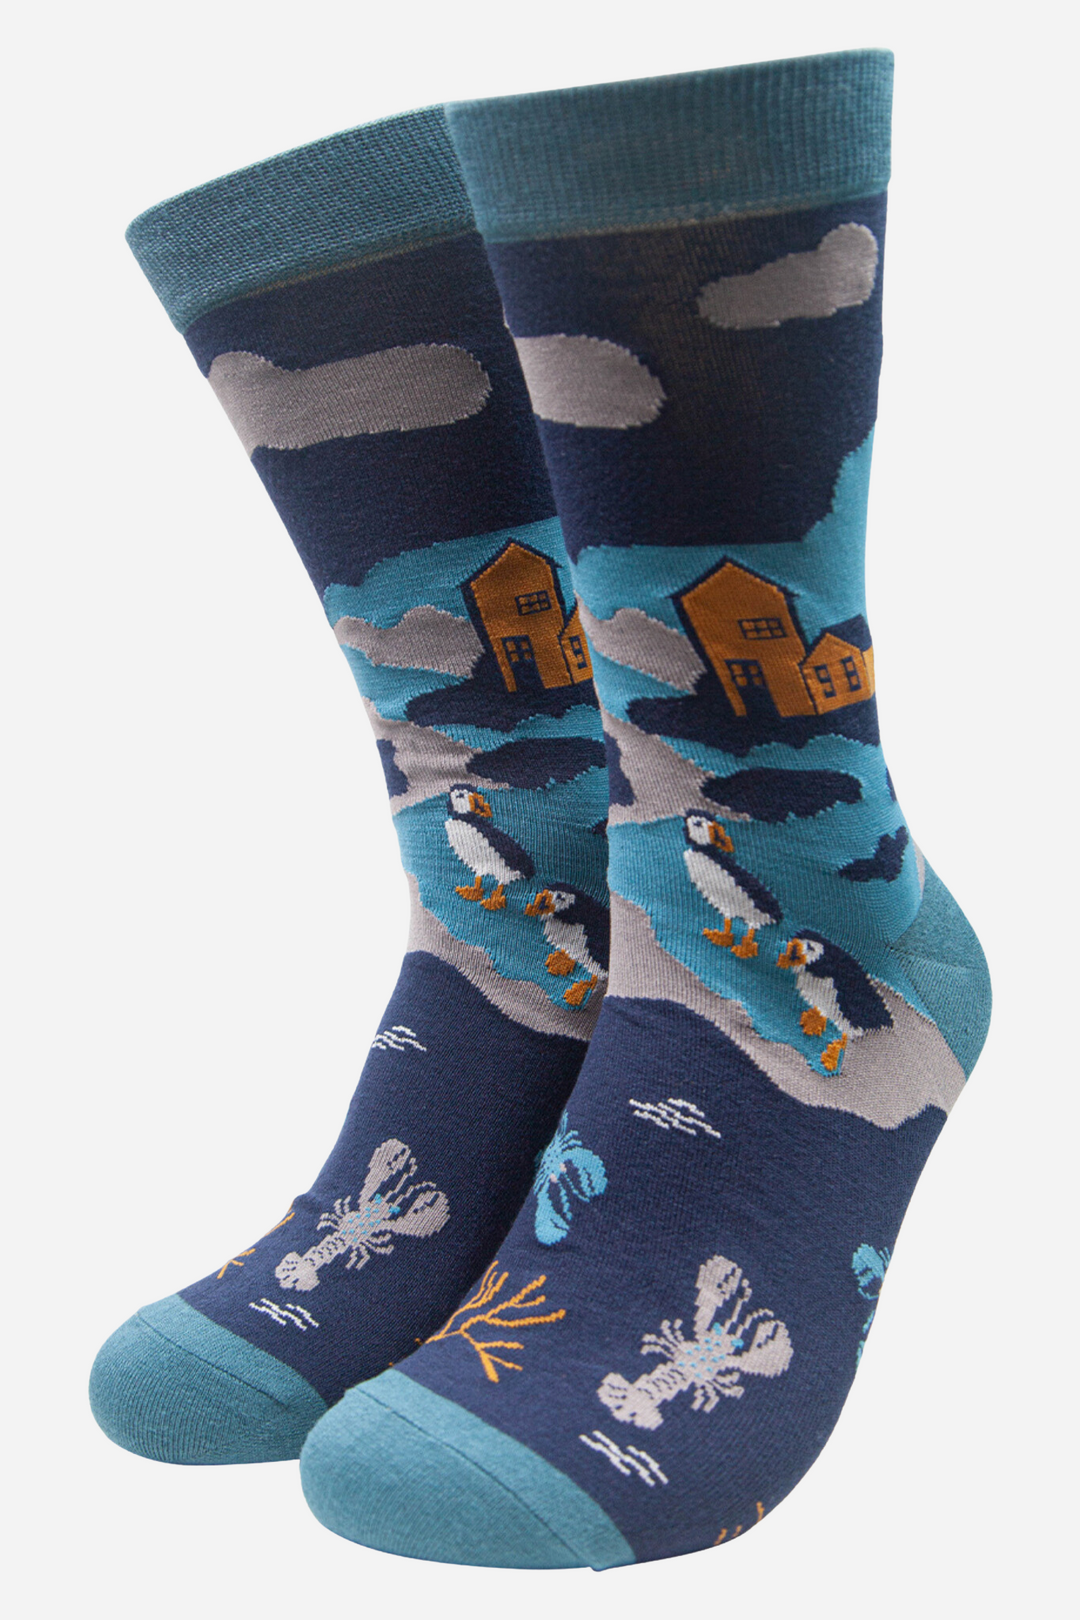 mens blue bamboo socks with puffins, lobsters and a seaside village in the background